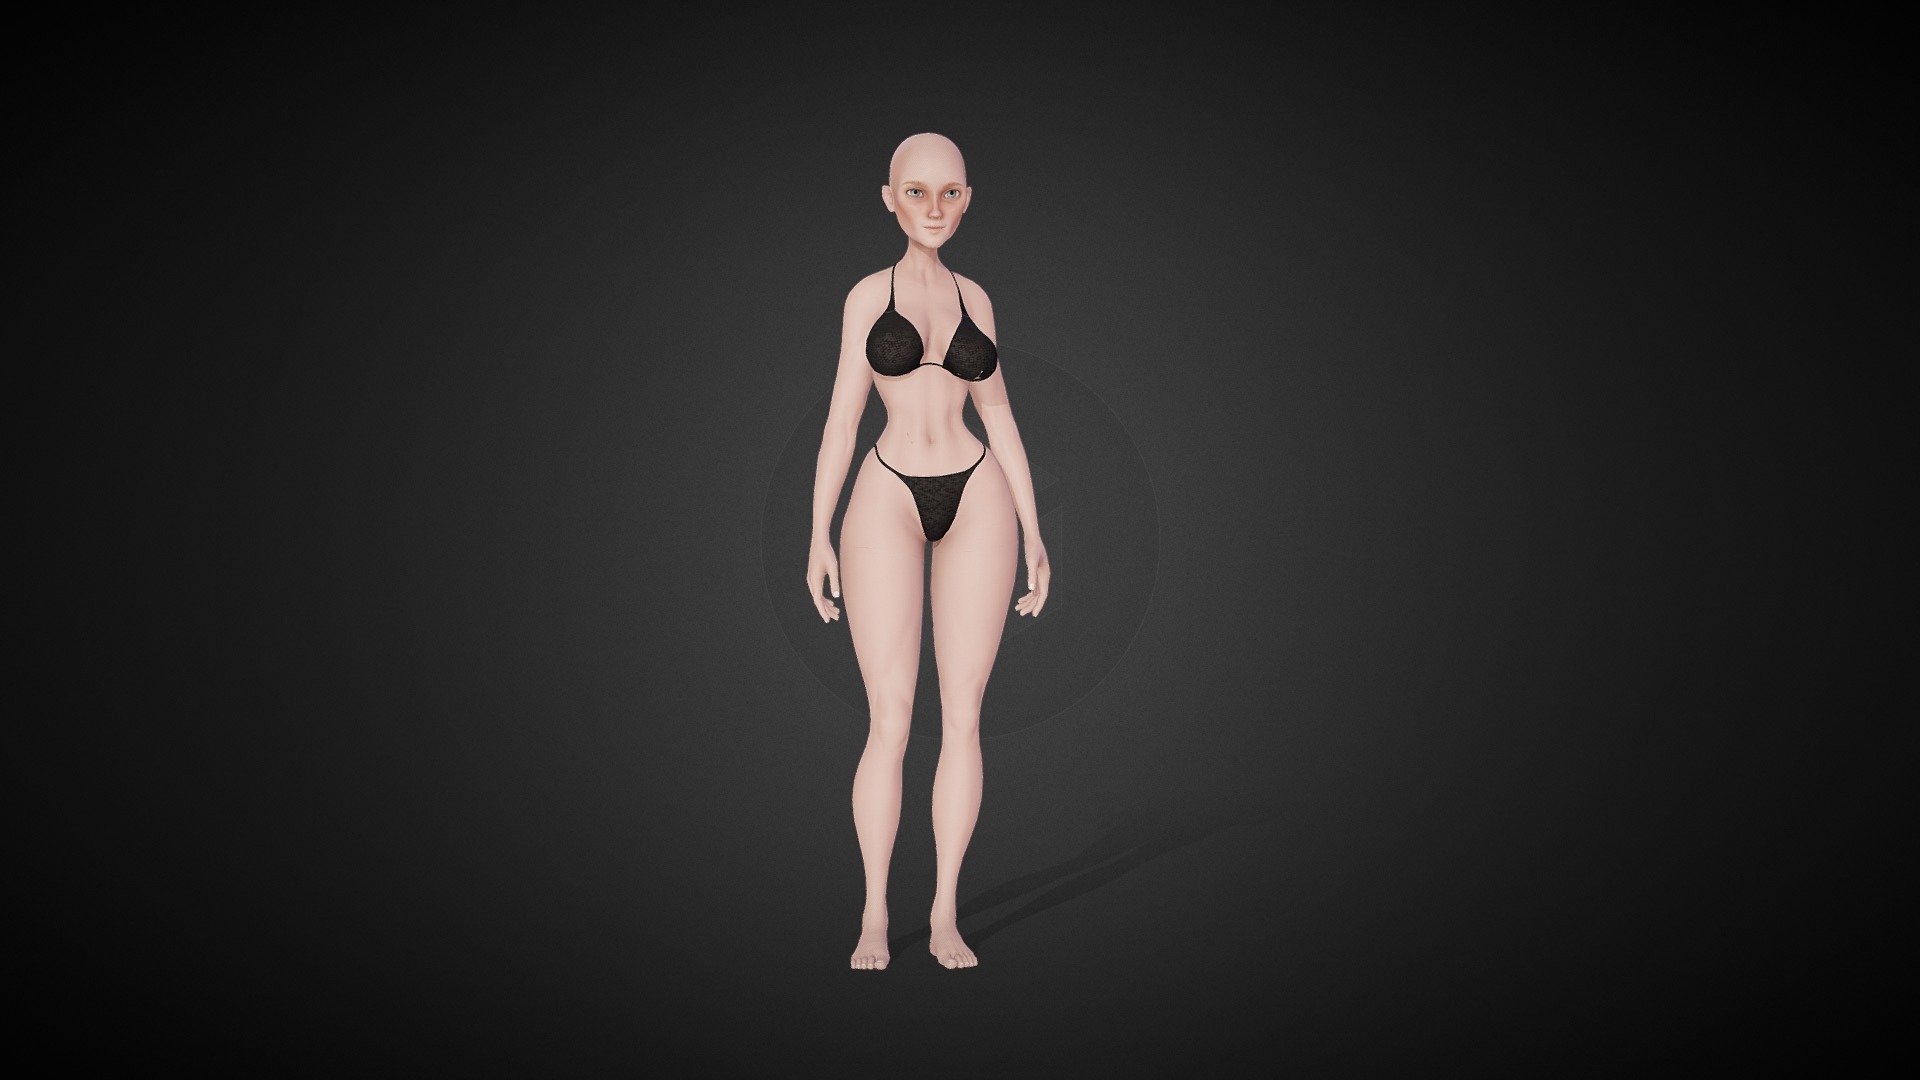 CC4 Alethia (CC1 character now remastered for Character Creator 4)

Find out more here:
https://marketplace.reallusion.com/cc4-stylized-base-combo-remastered

You are looking for characters for your project? Check out all my Character Creator assets here:
https://www.reallusion.com/contentstore/featureddeveloper/profile/#!/ToKoMotion/Character%20Creator - CC4 Alethia (CC1 Remastered) - 3D model by ToKoMotion 3d model